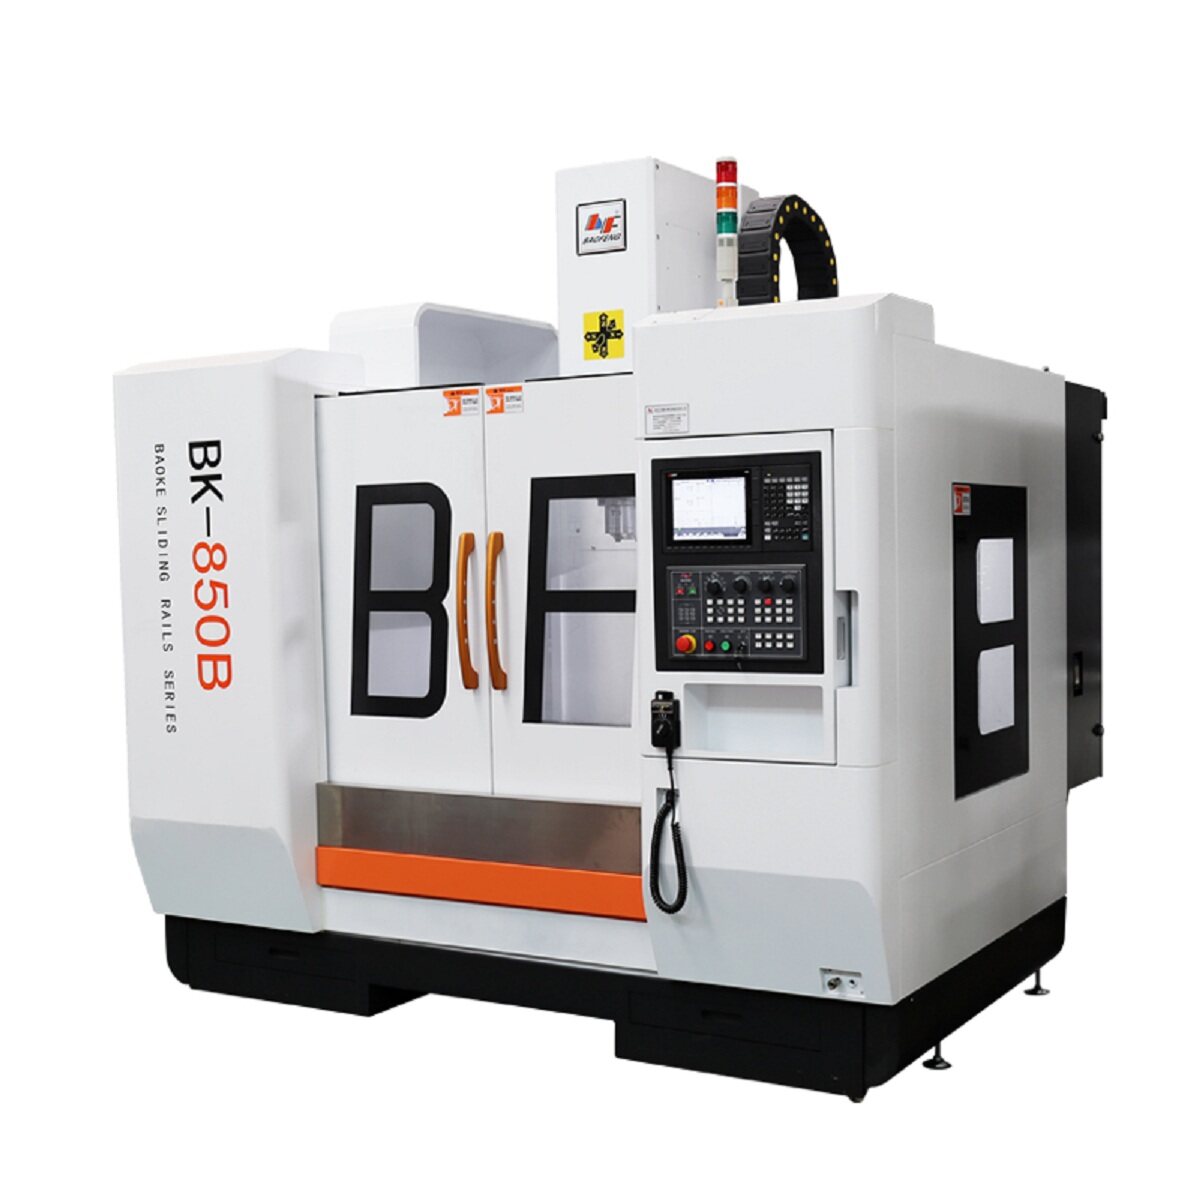 High Speed Box way machining center Vertical CNC Machinery for Mold Processing